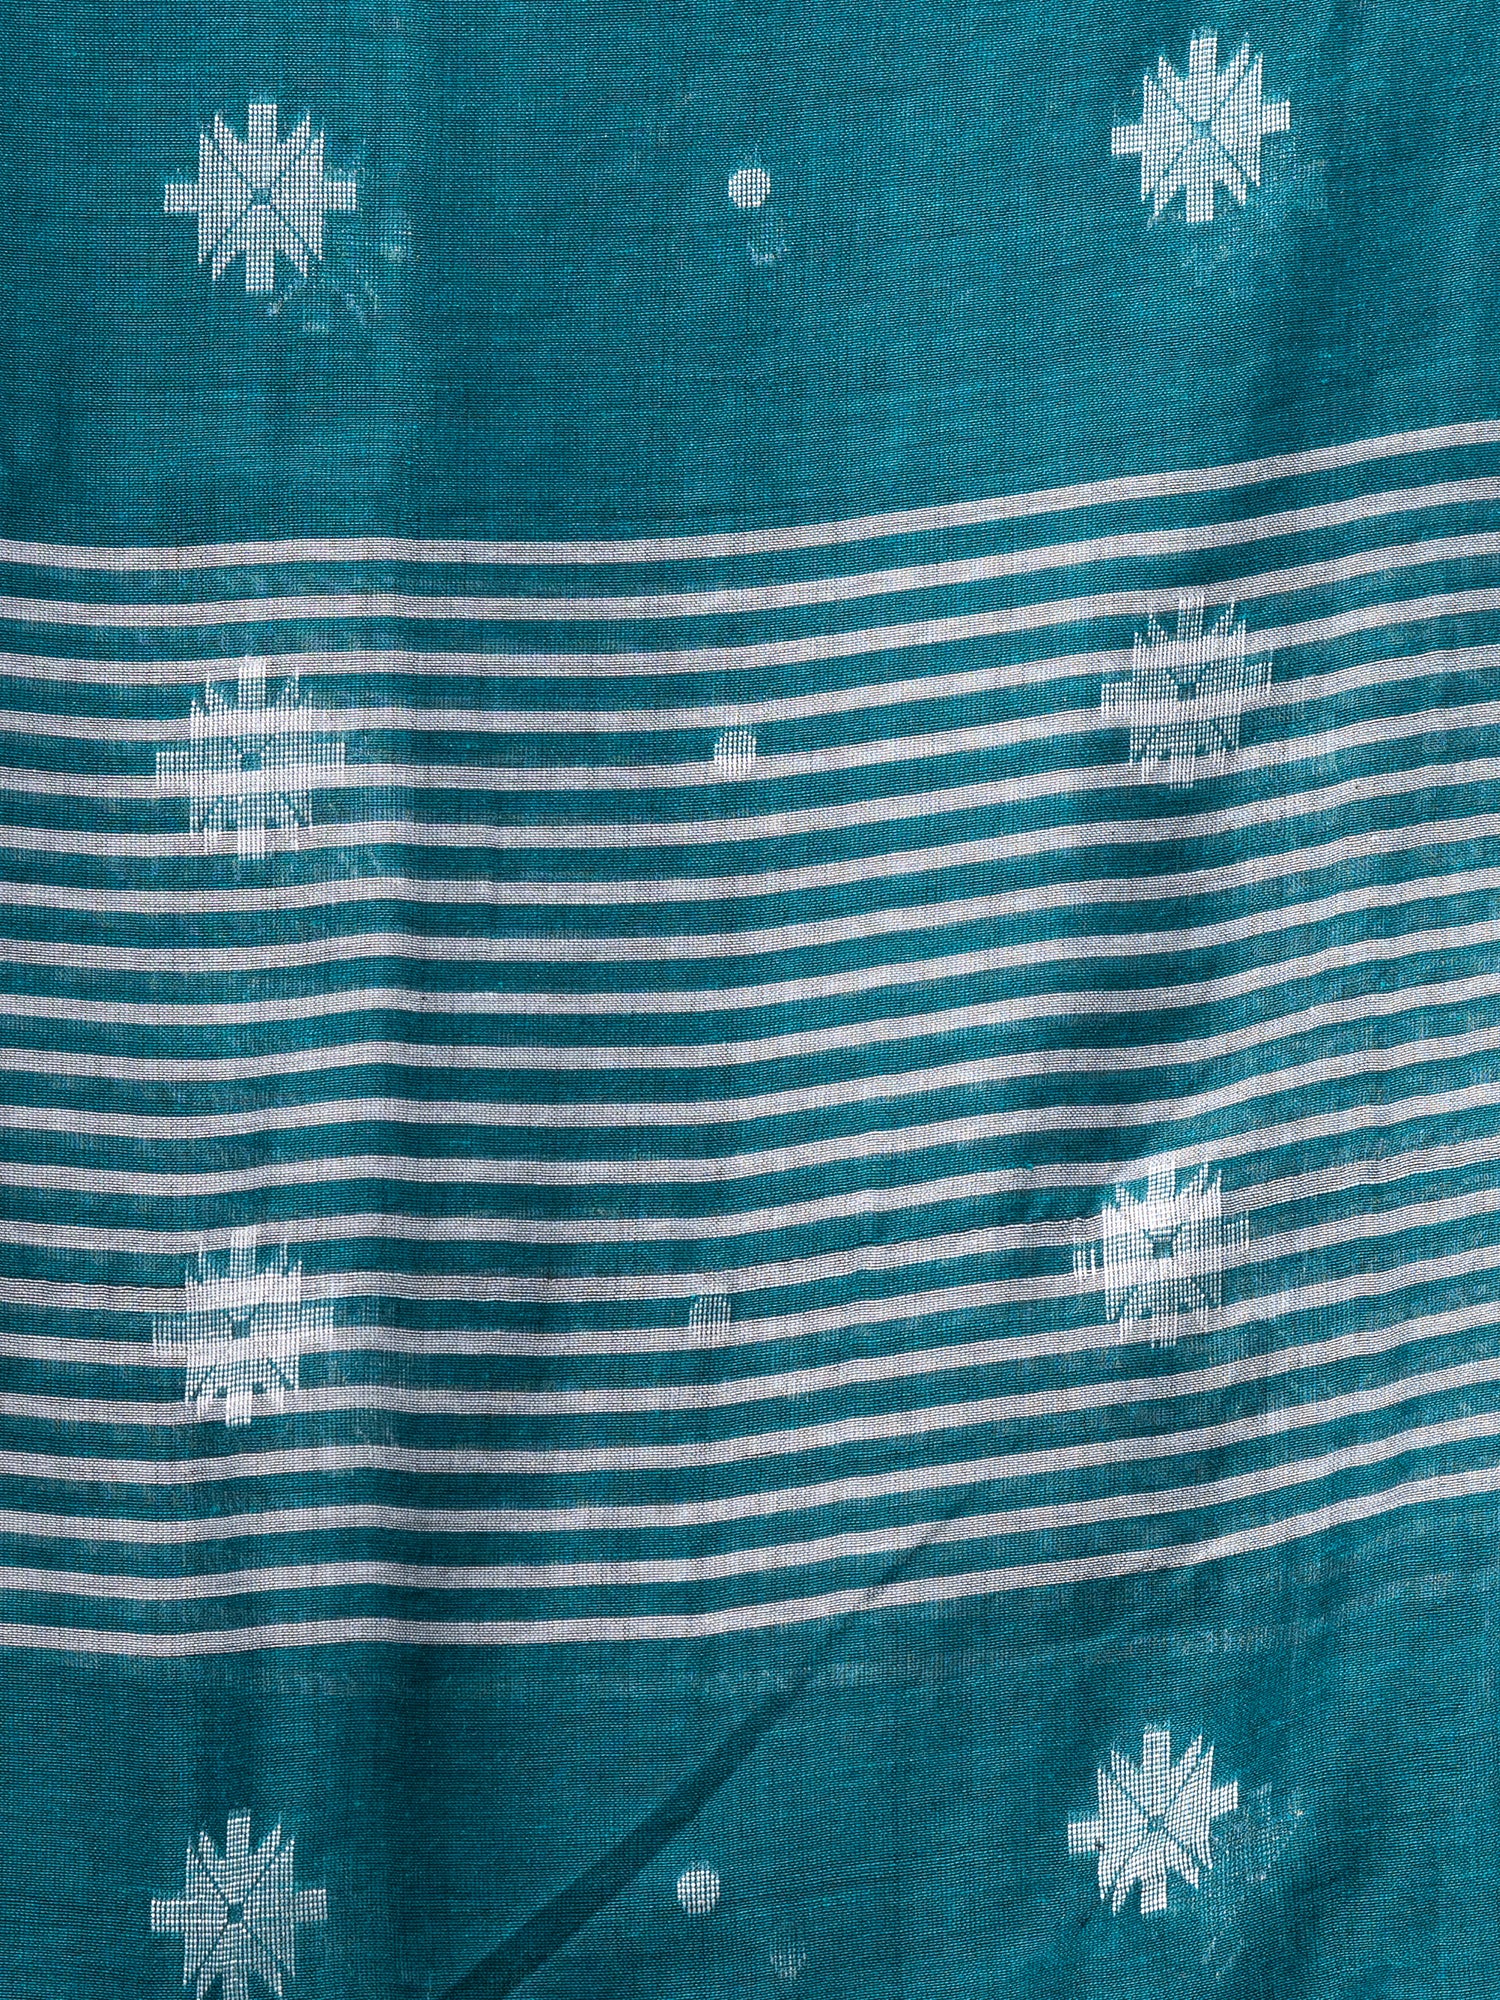 Women's Teal Green Cotton Handloom Saree With White Flower Butta - In Weave Sarees